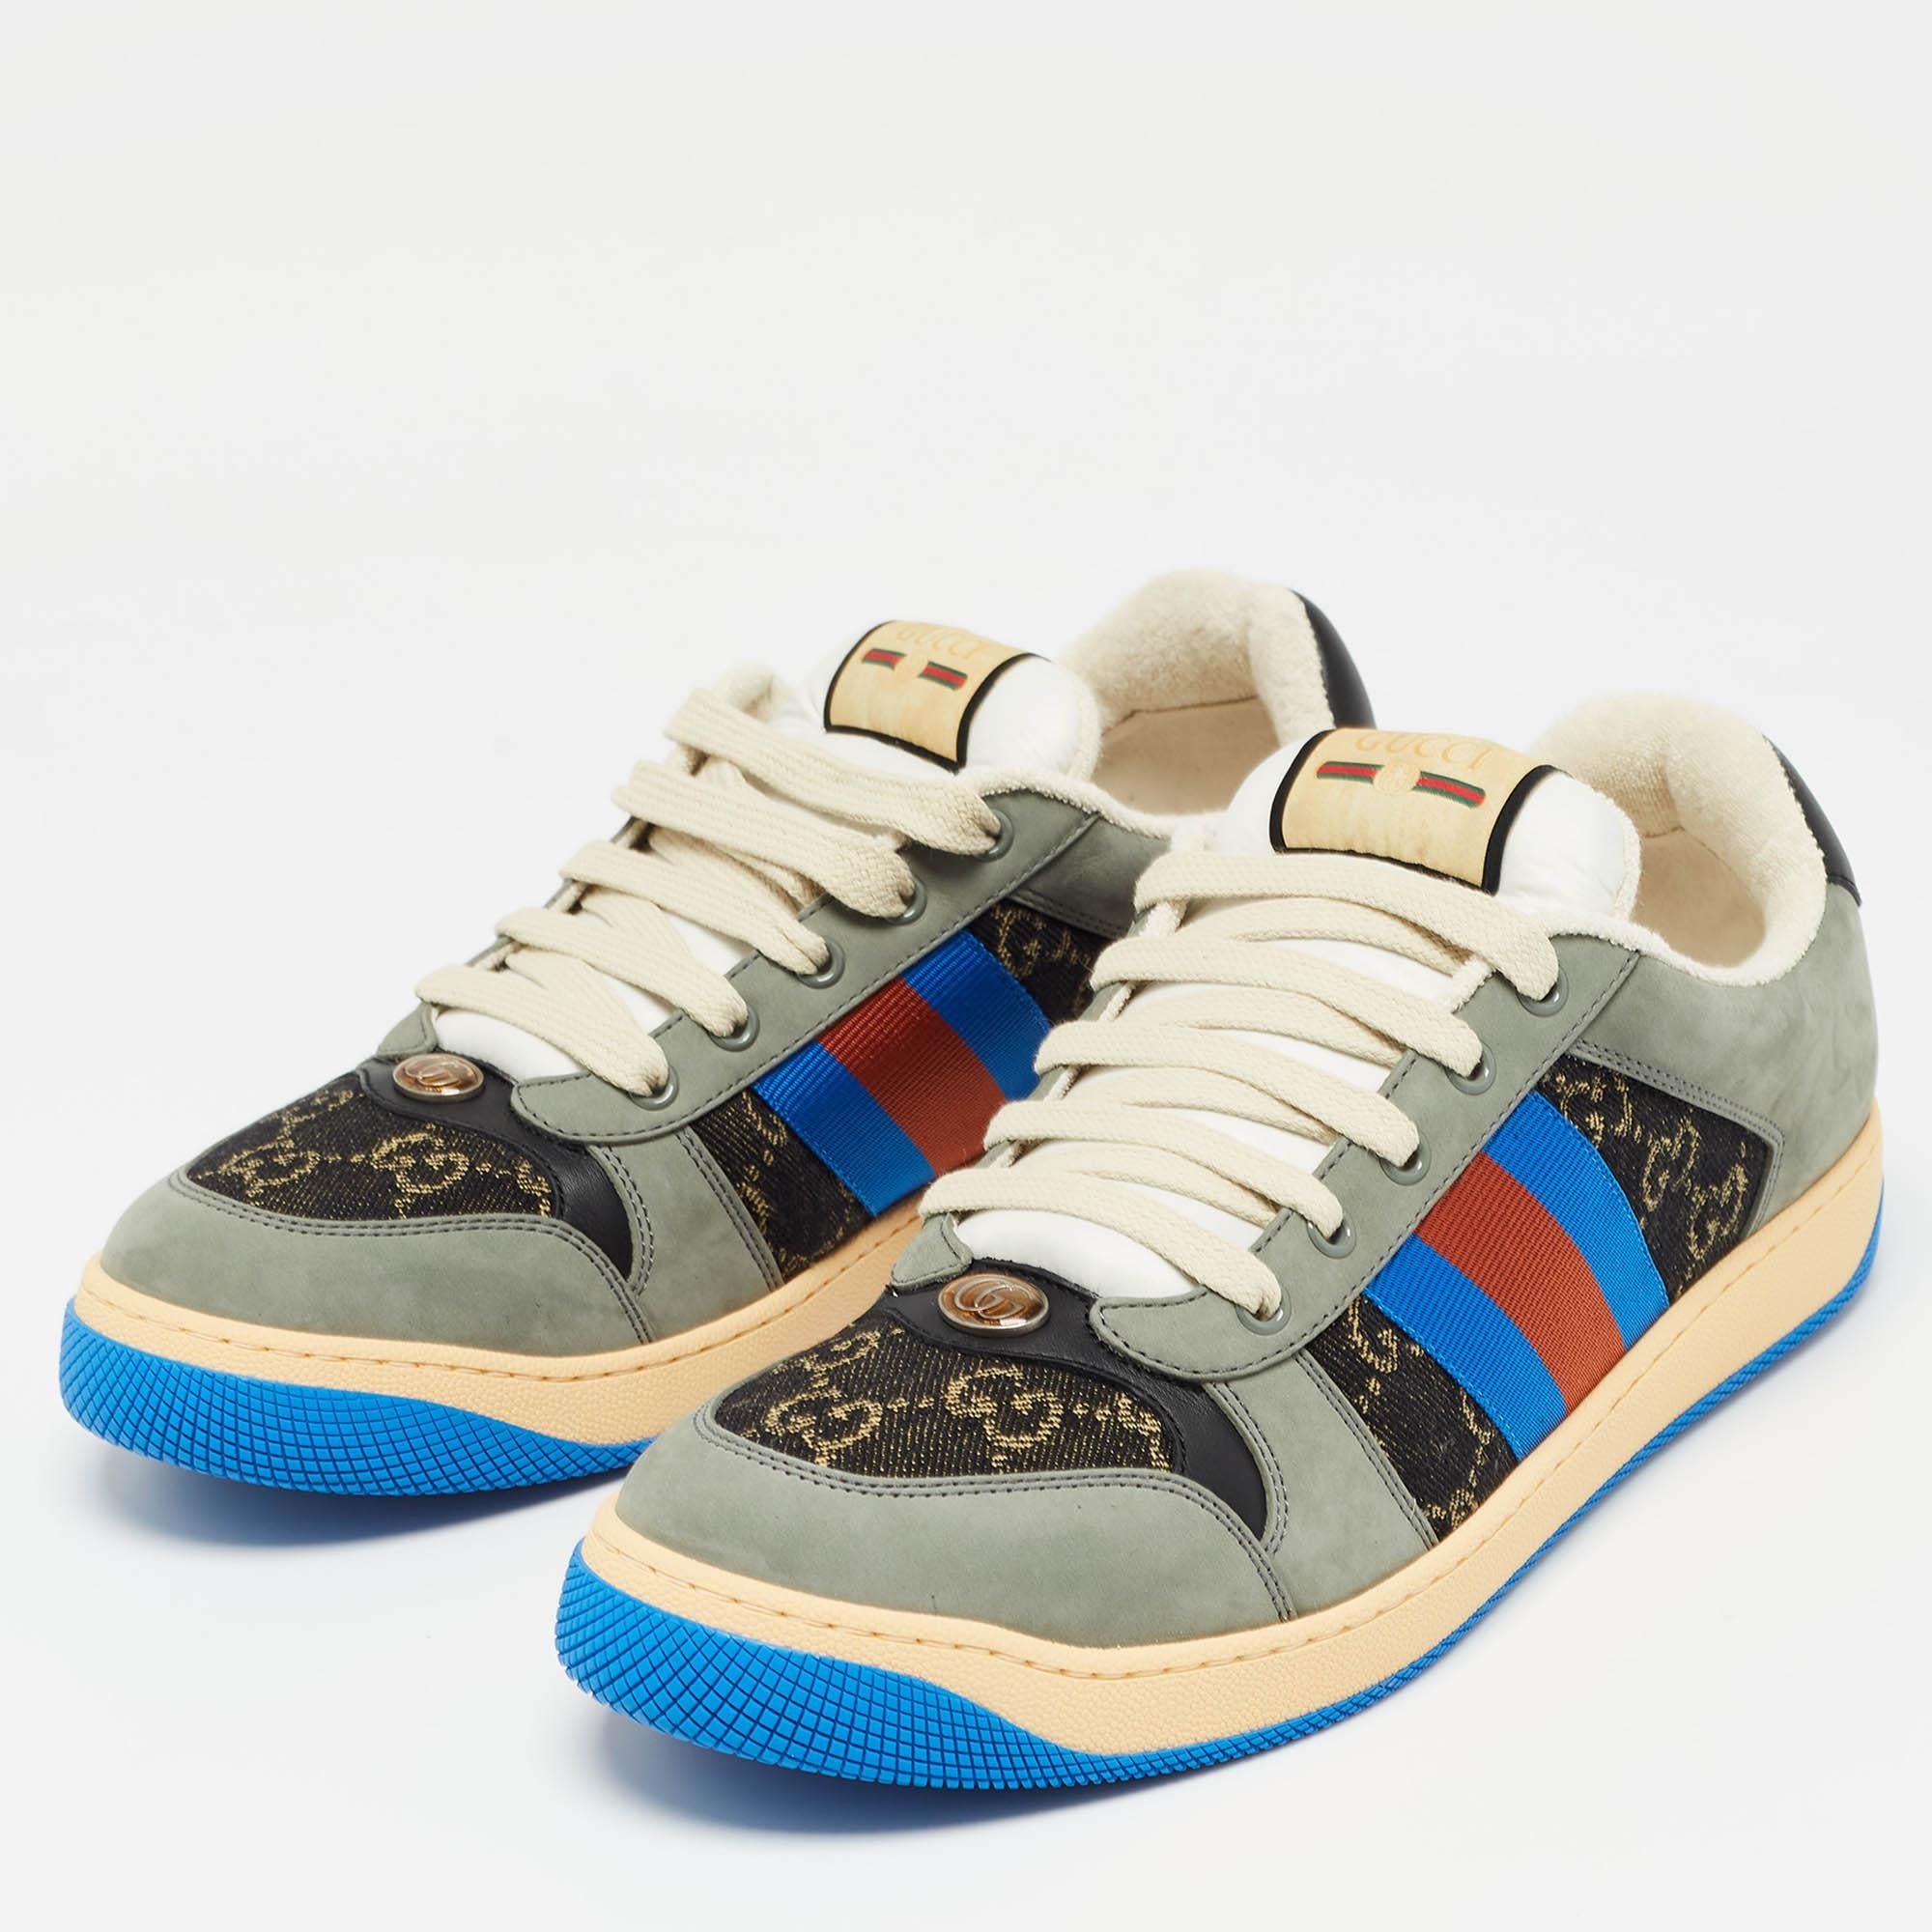 Gucci Multicolor GG Canvas and Nubuck Leather Screener Sneakers Size 44.5 2